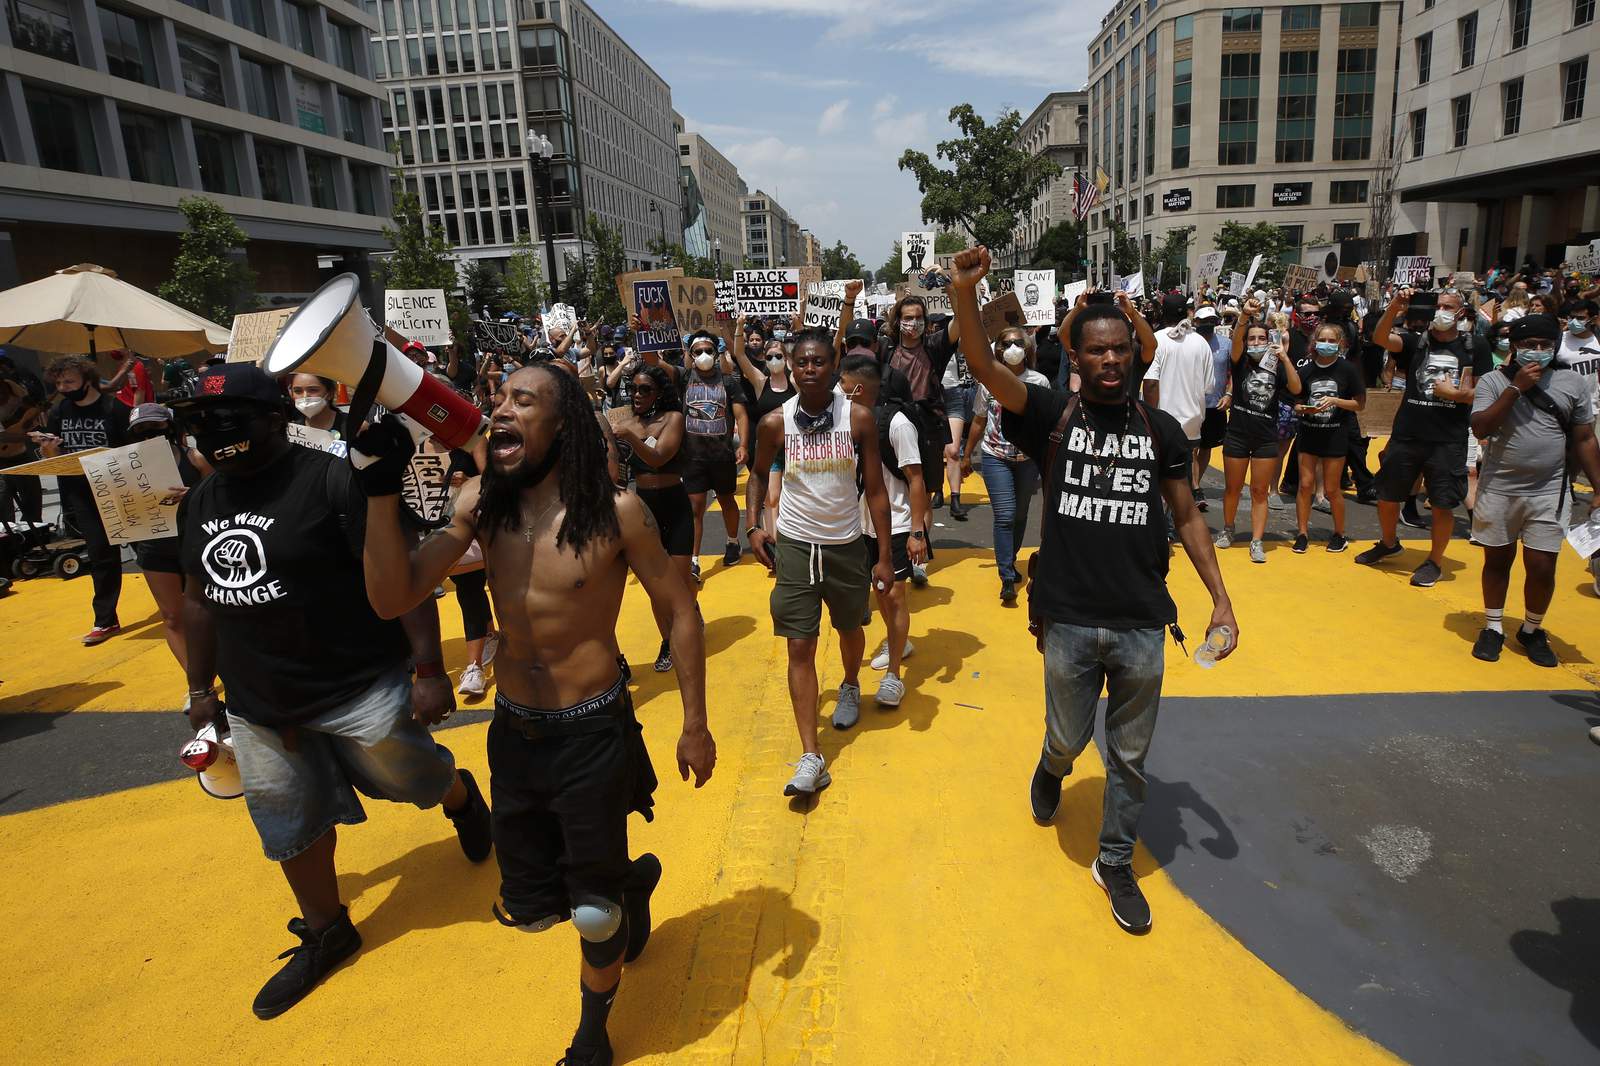 Juneteenth: A day of joy and pain - and now national action